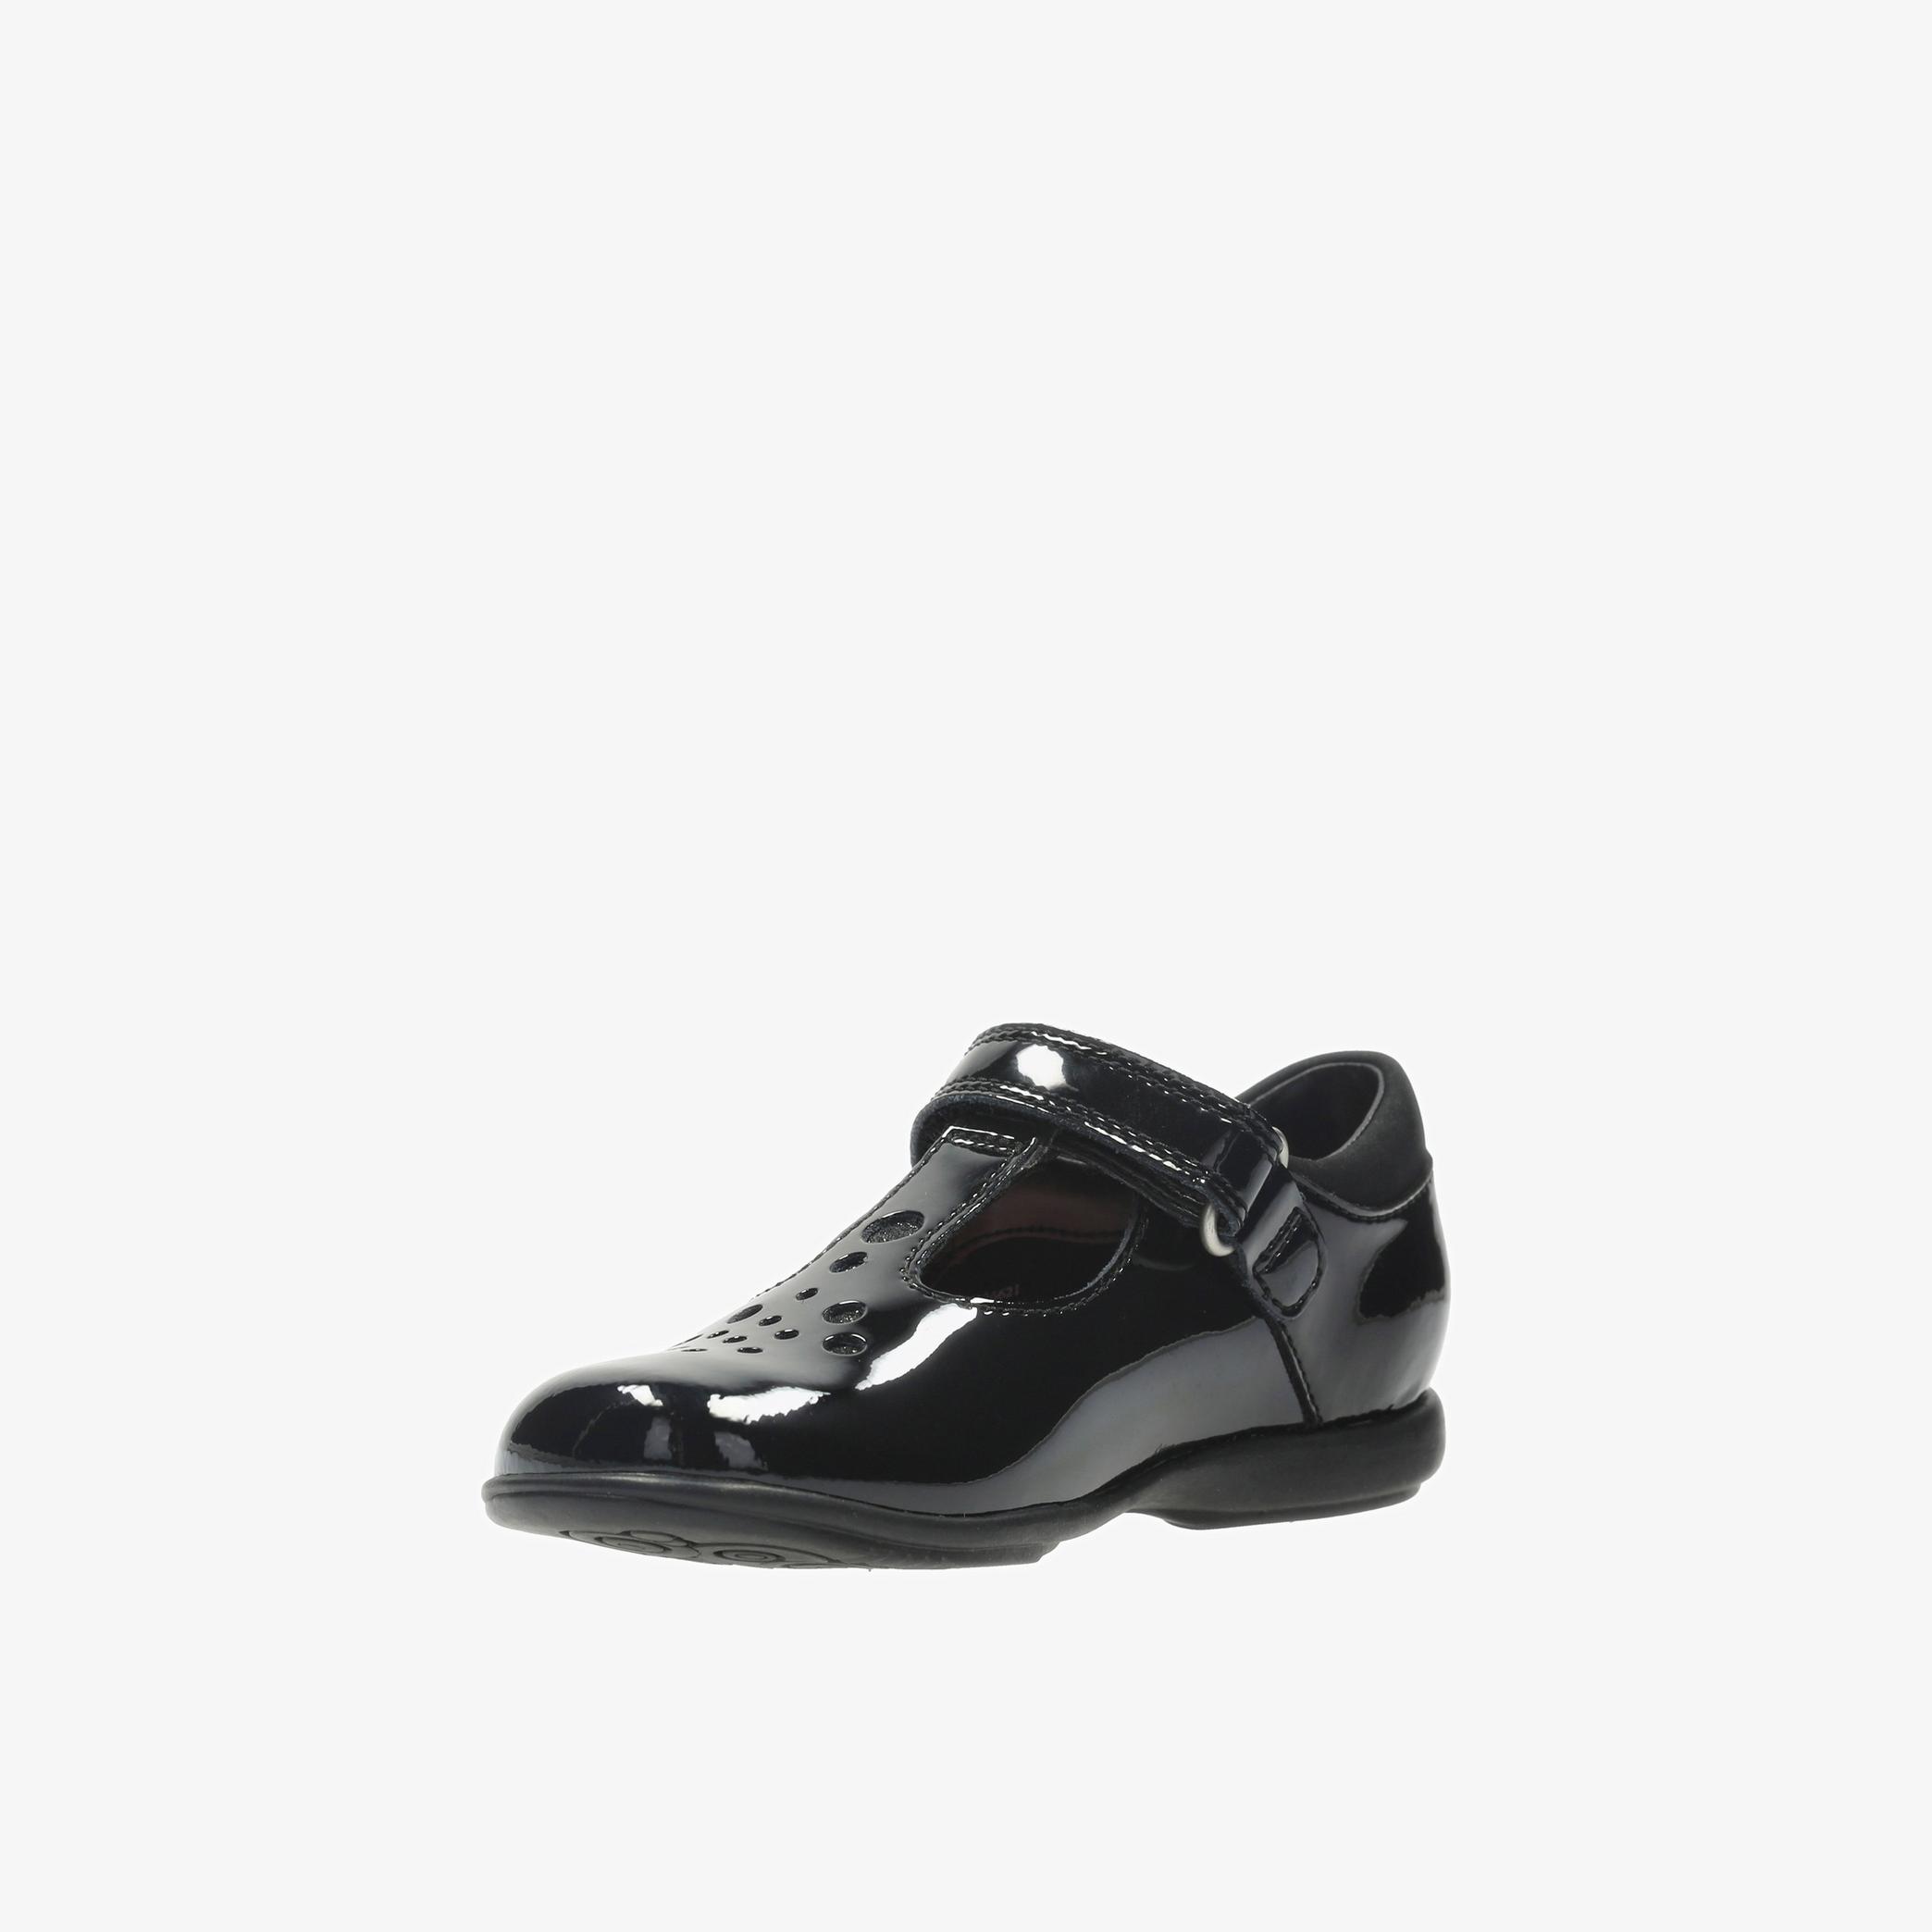 Trixi Pip Toddler Black Patent Shoes, view 4 of 6